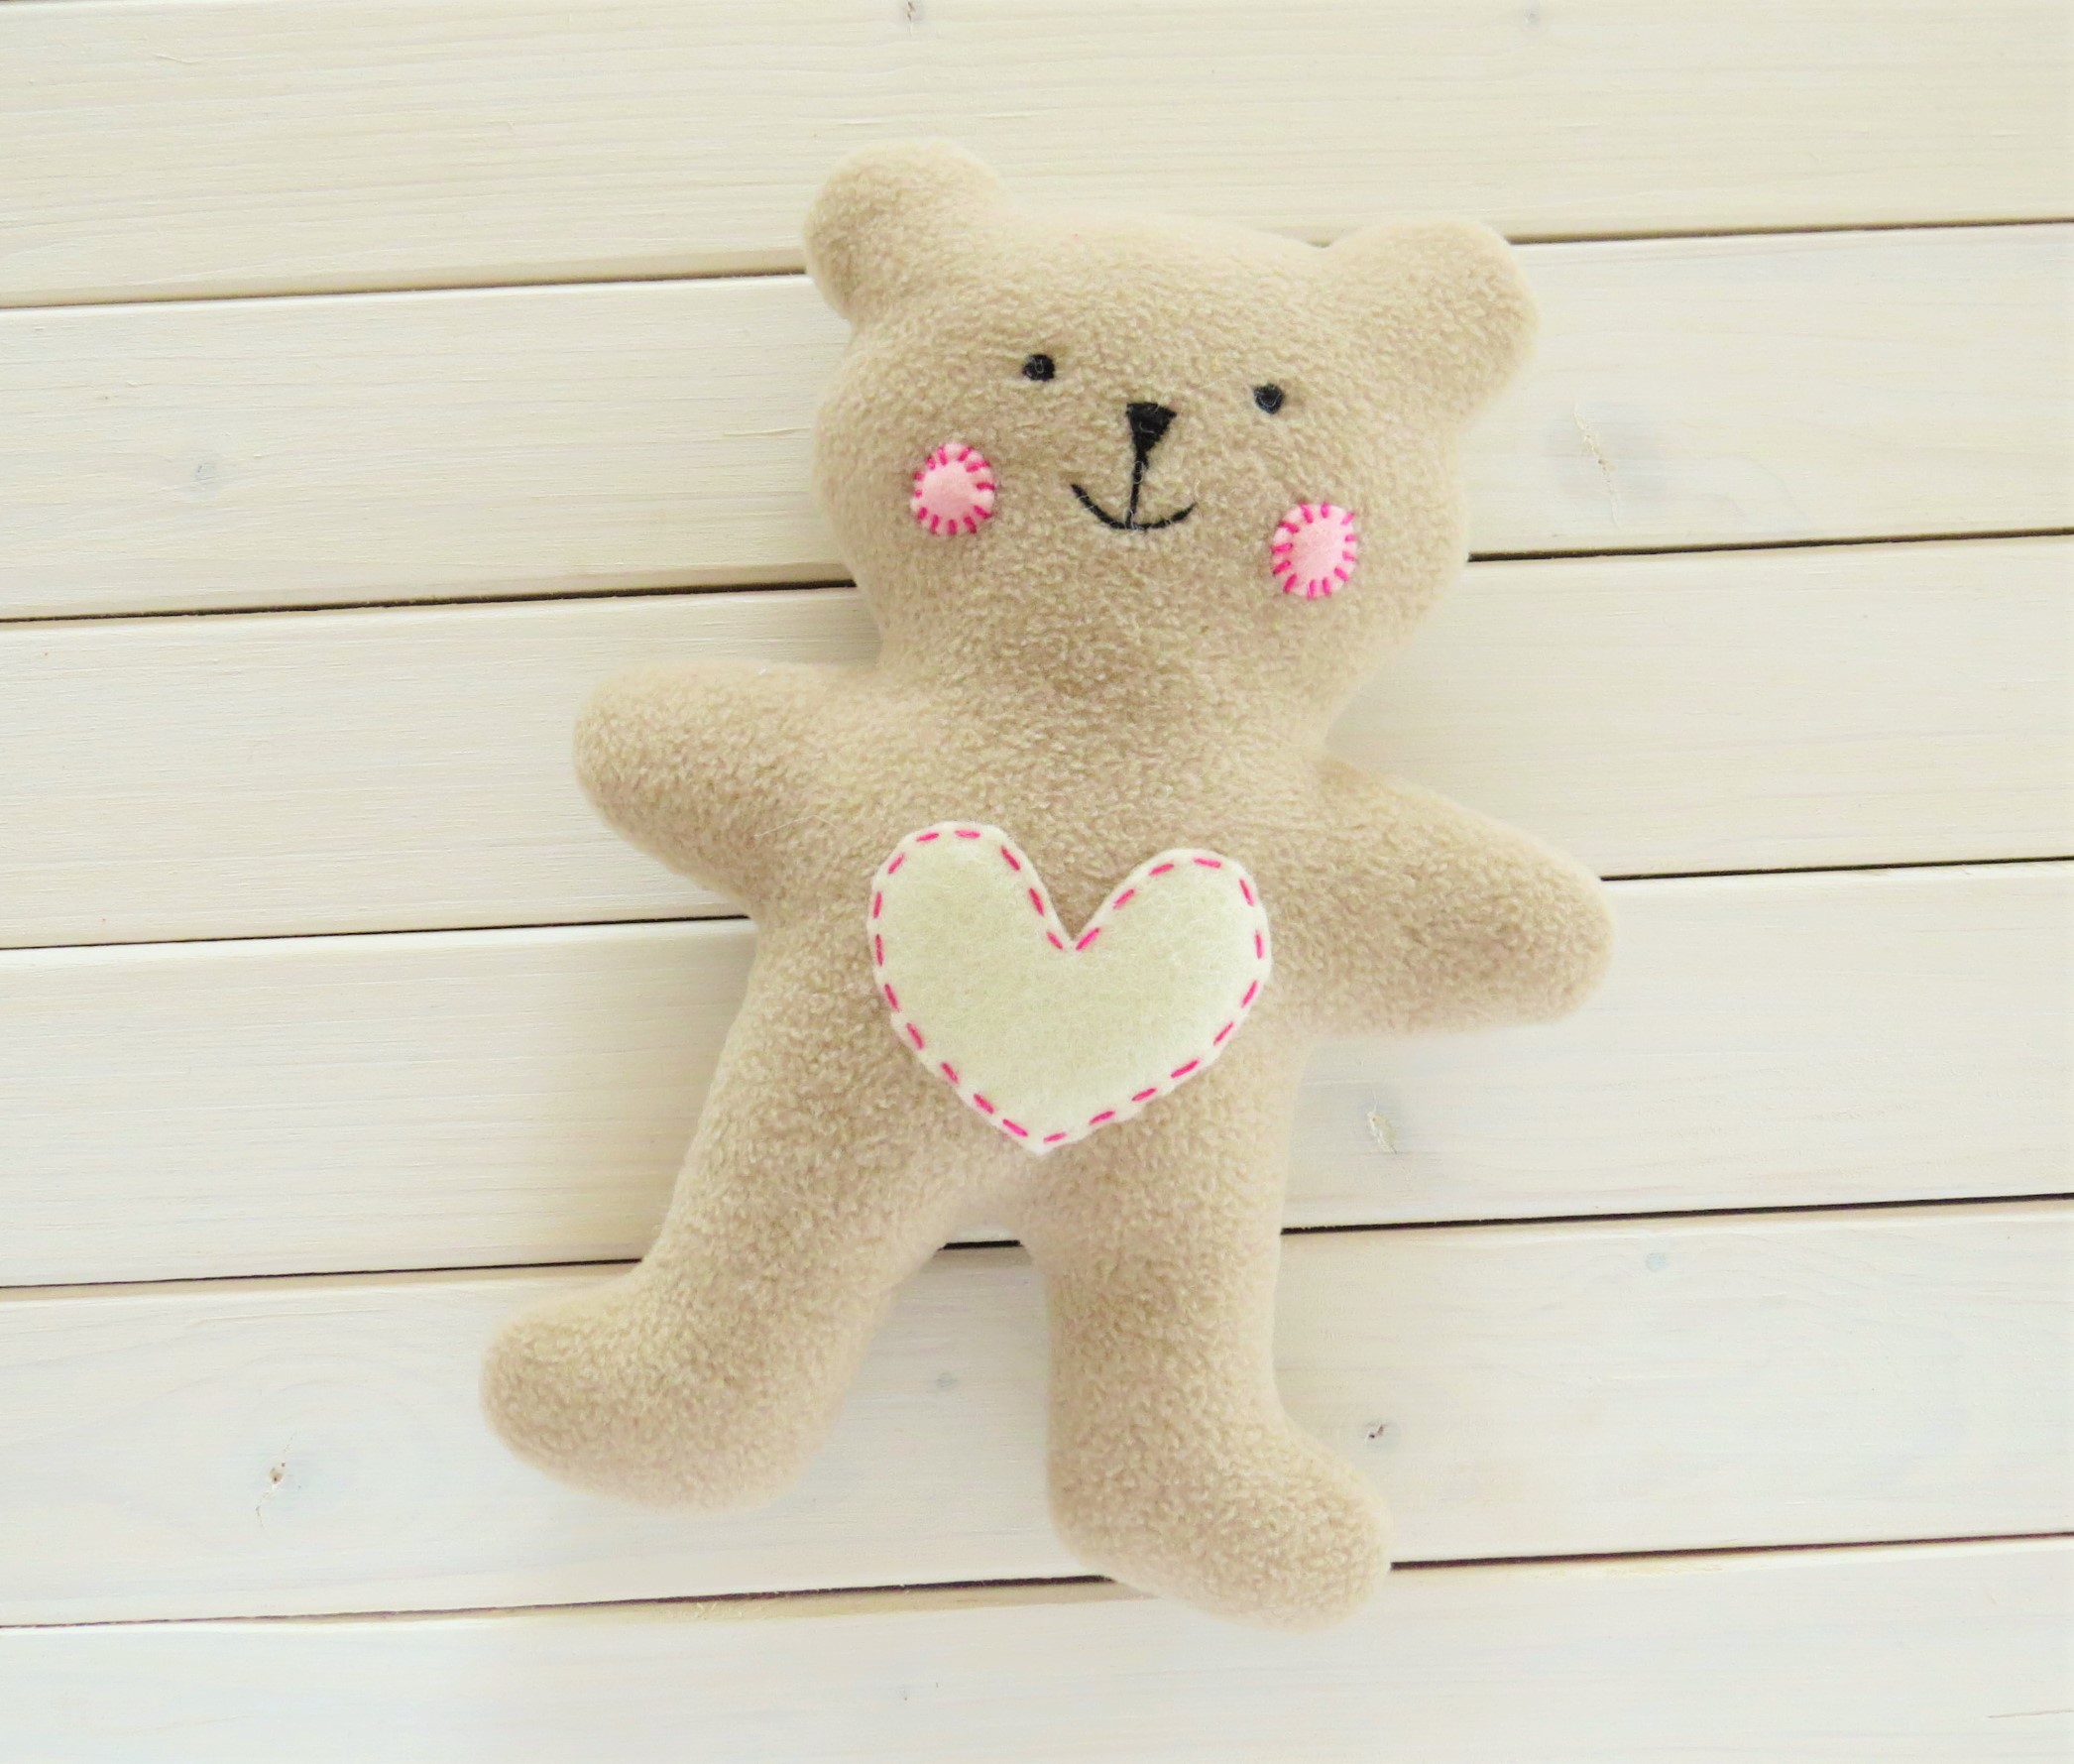 HOW TO SEW QUICKLY A CUTE LITTLE SOFT BABY TEDDY BEAR — Sew Toy